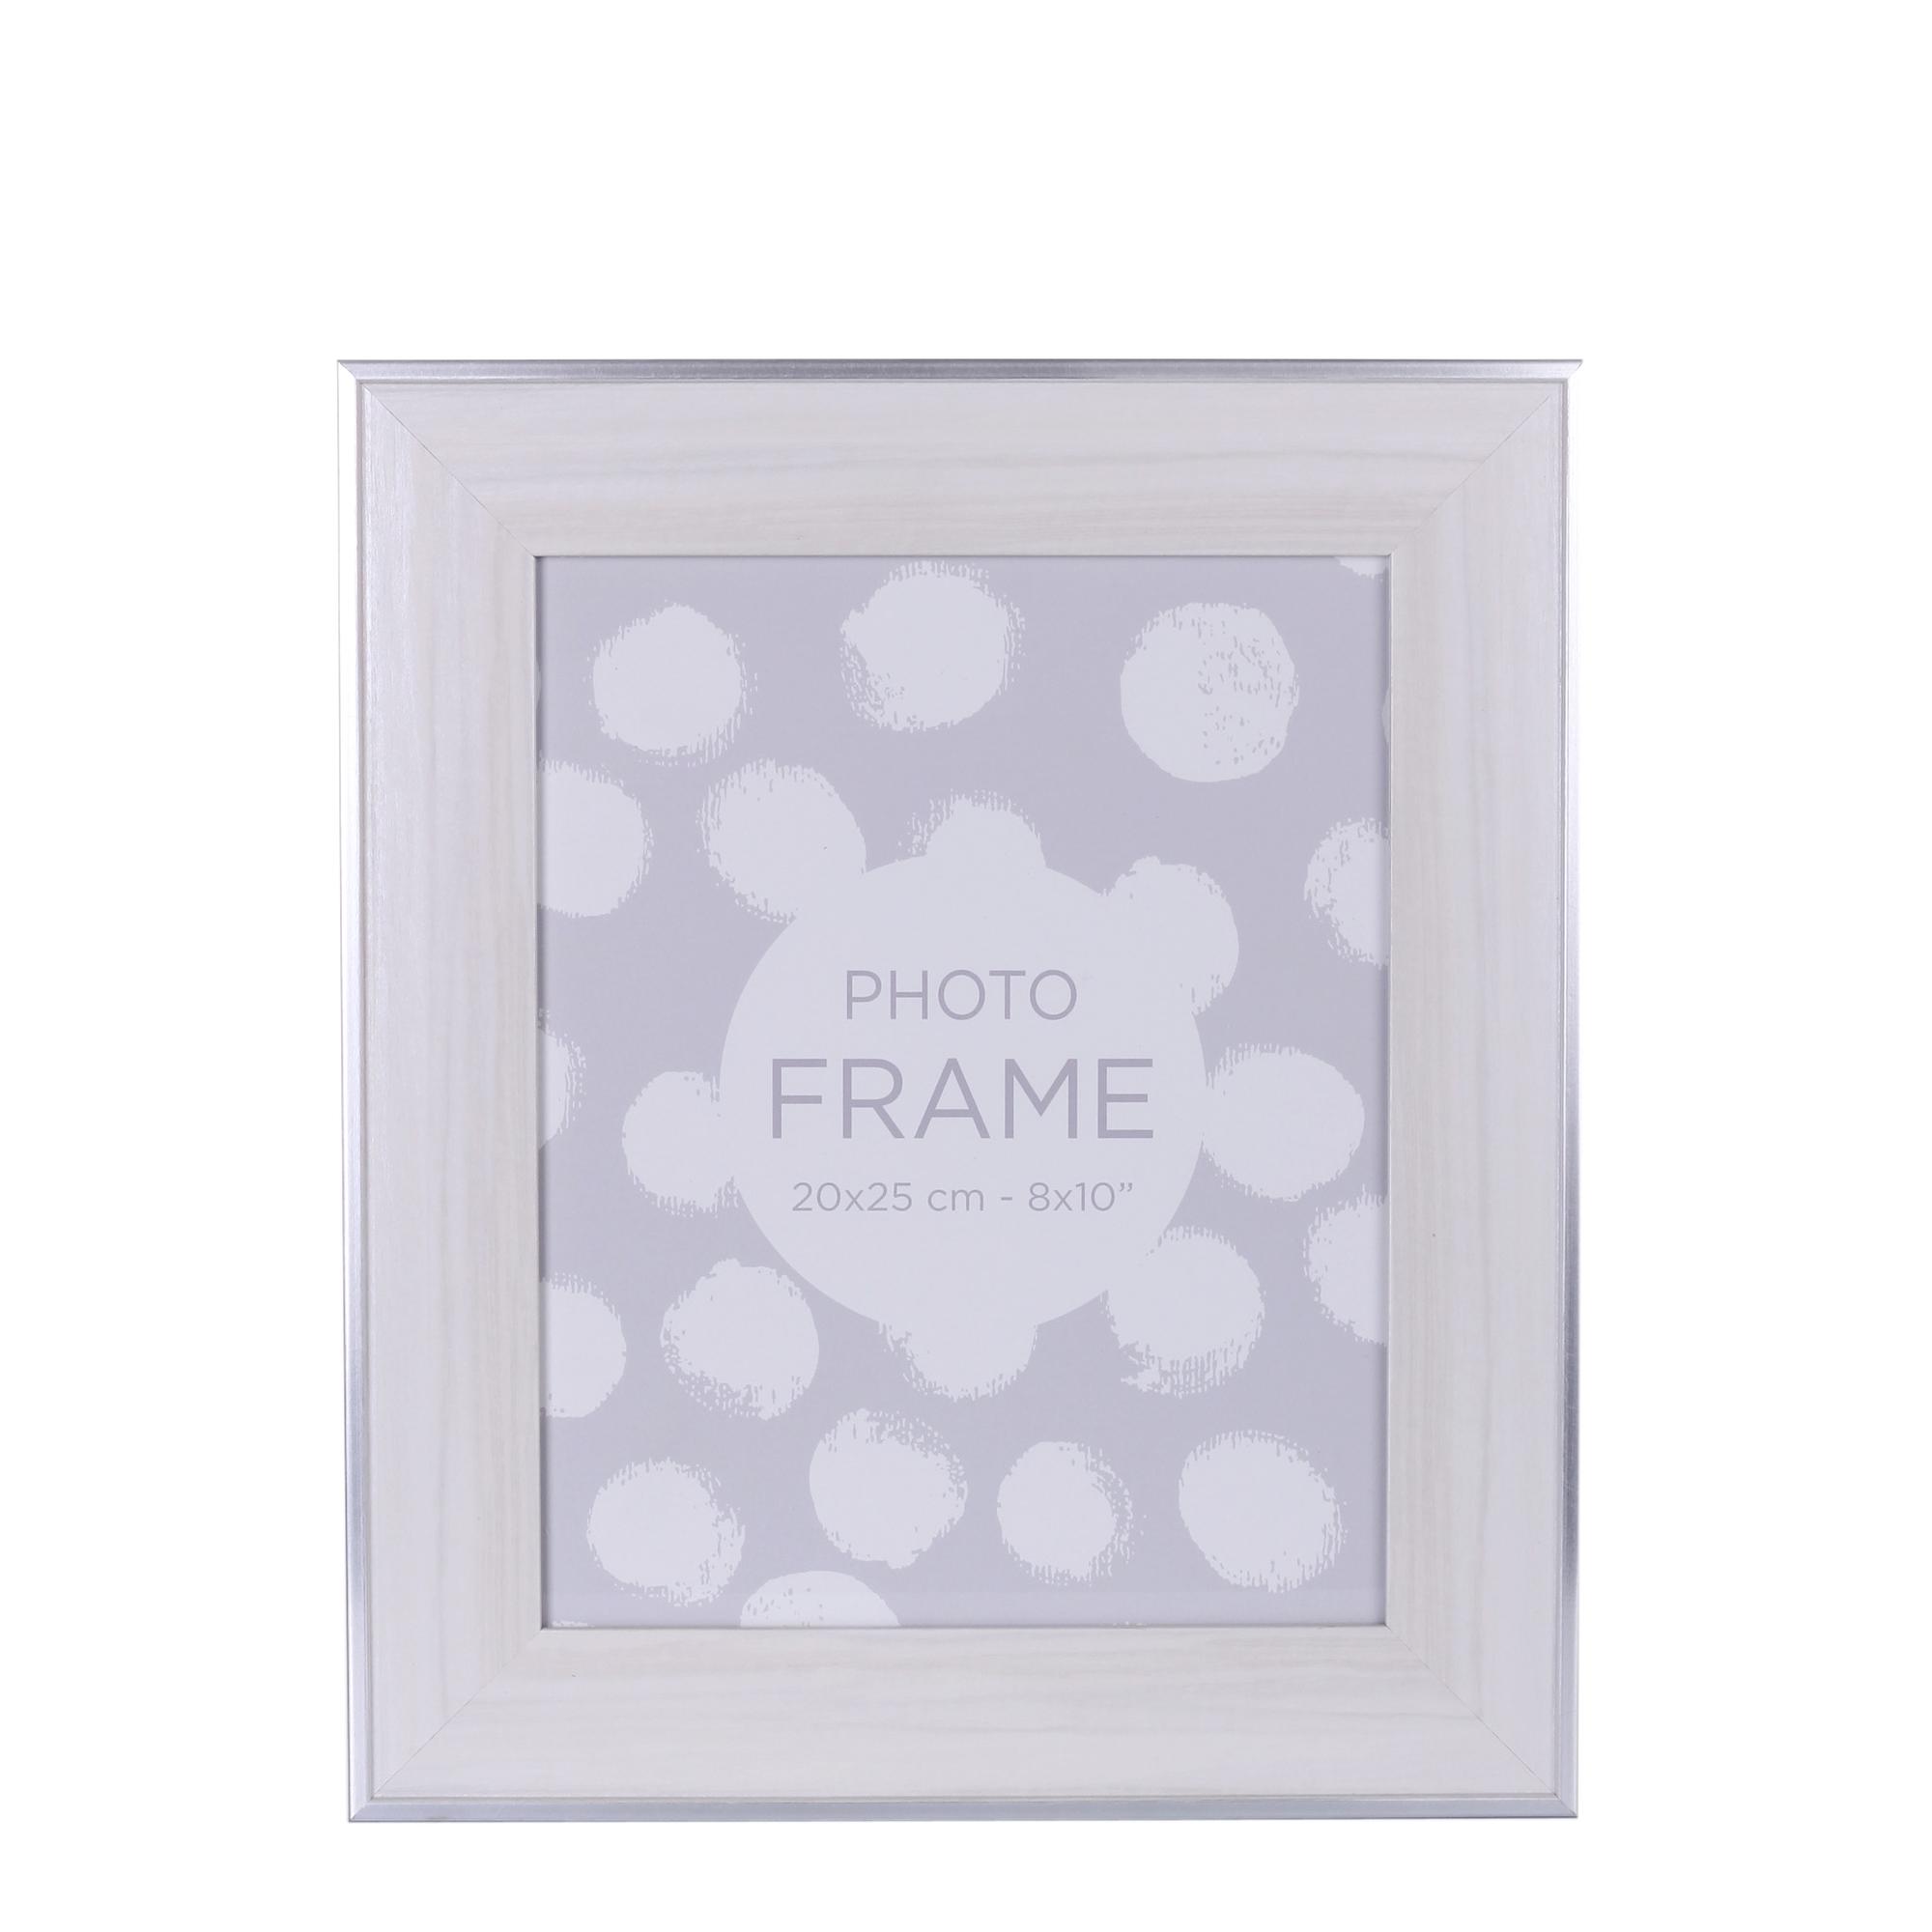 PICTURE FRAME 8 X 10 inch - 531-26195